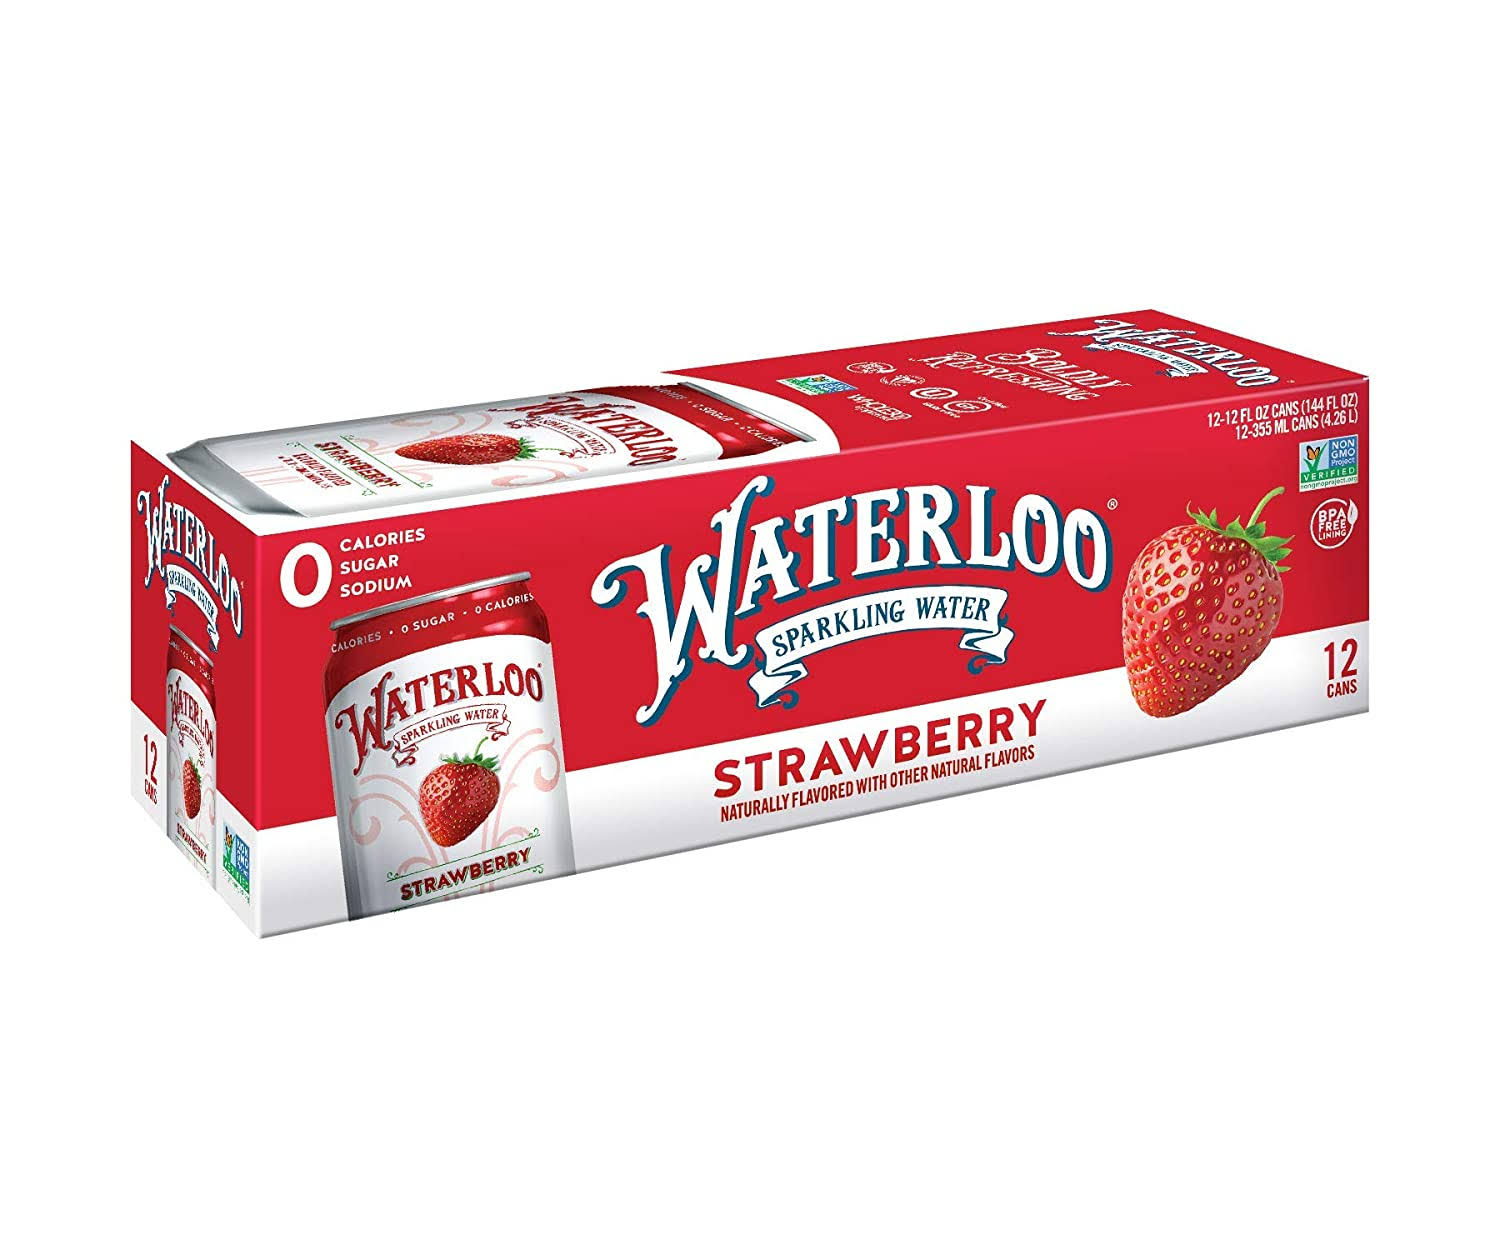 Waterloo Sparkling Water, Strawberry - 12 pack, 12 fl oz cans